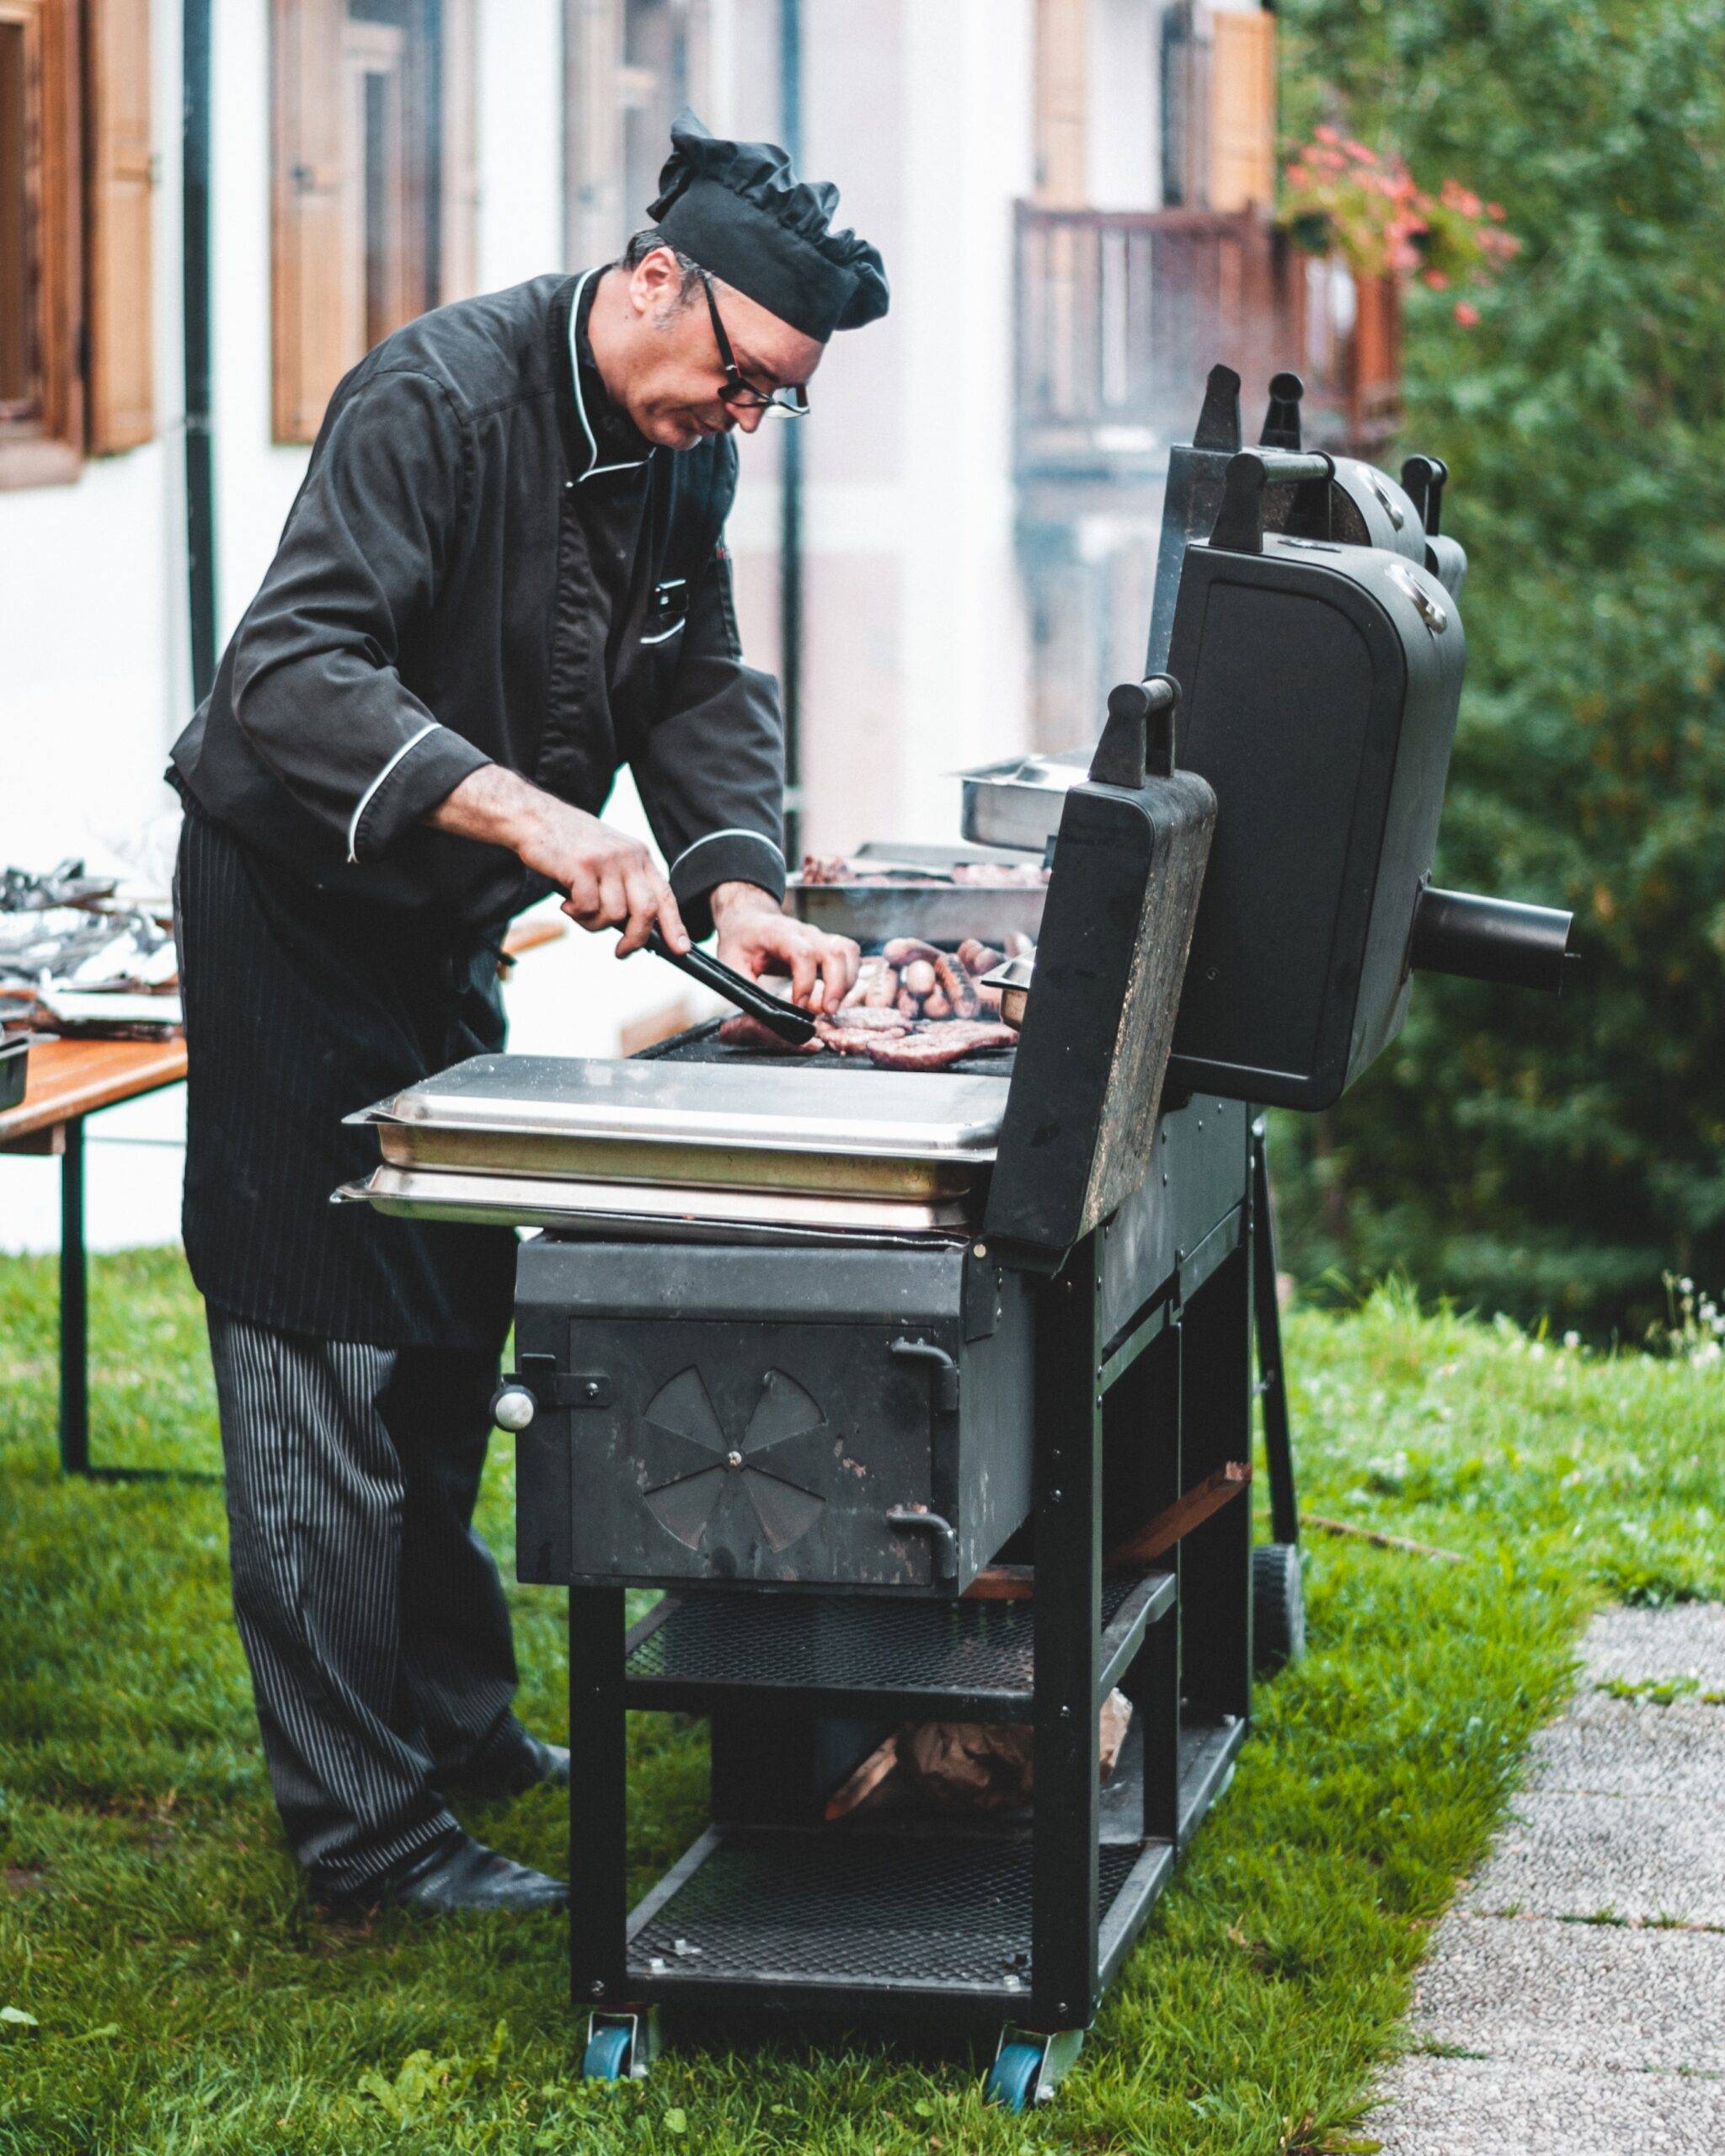 The 6 Best Advanced Techniques for Chef-Level Grilling